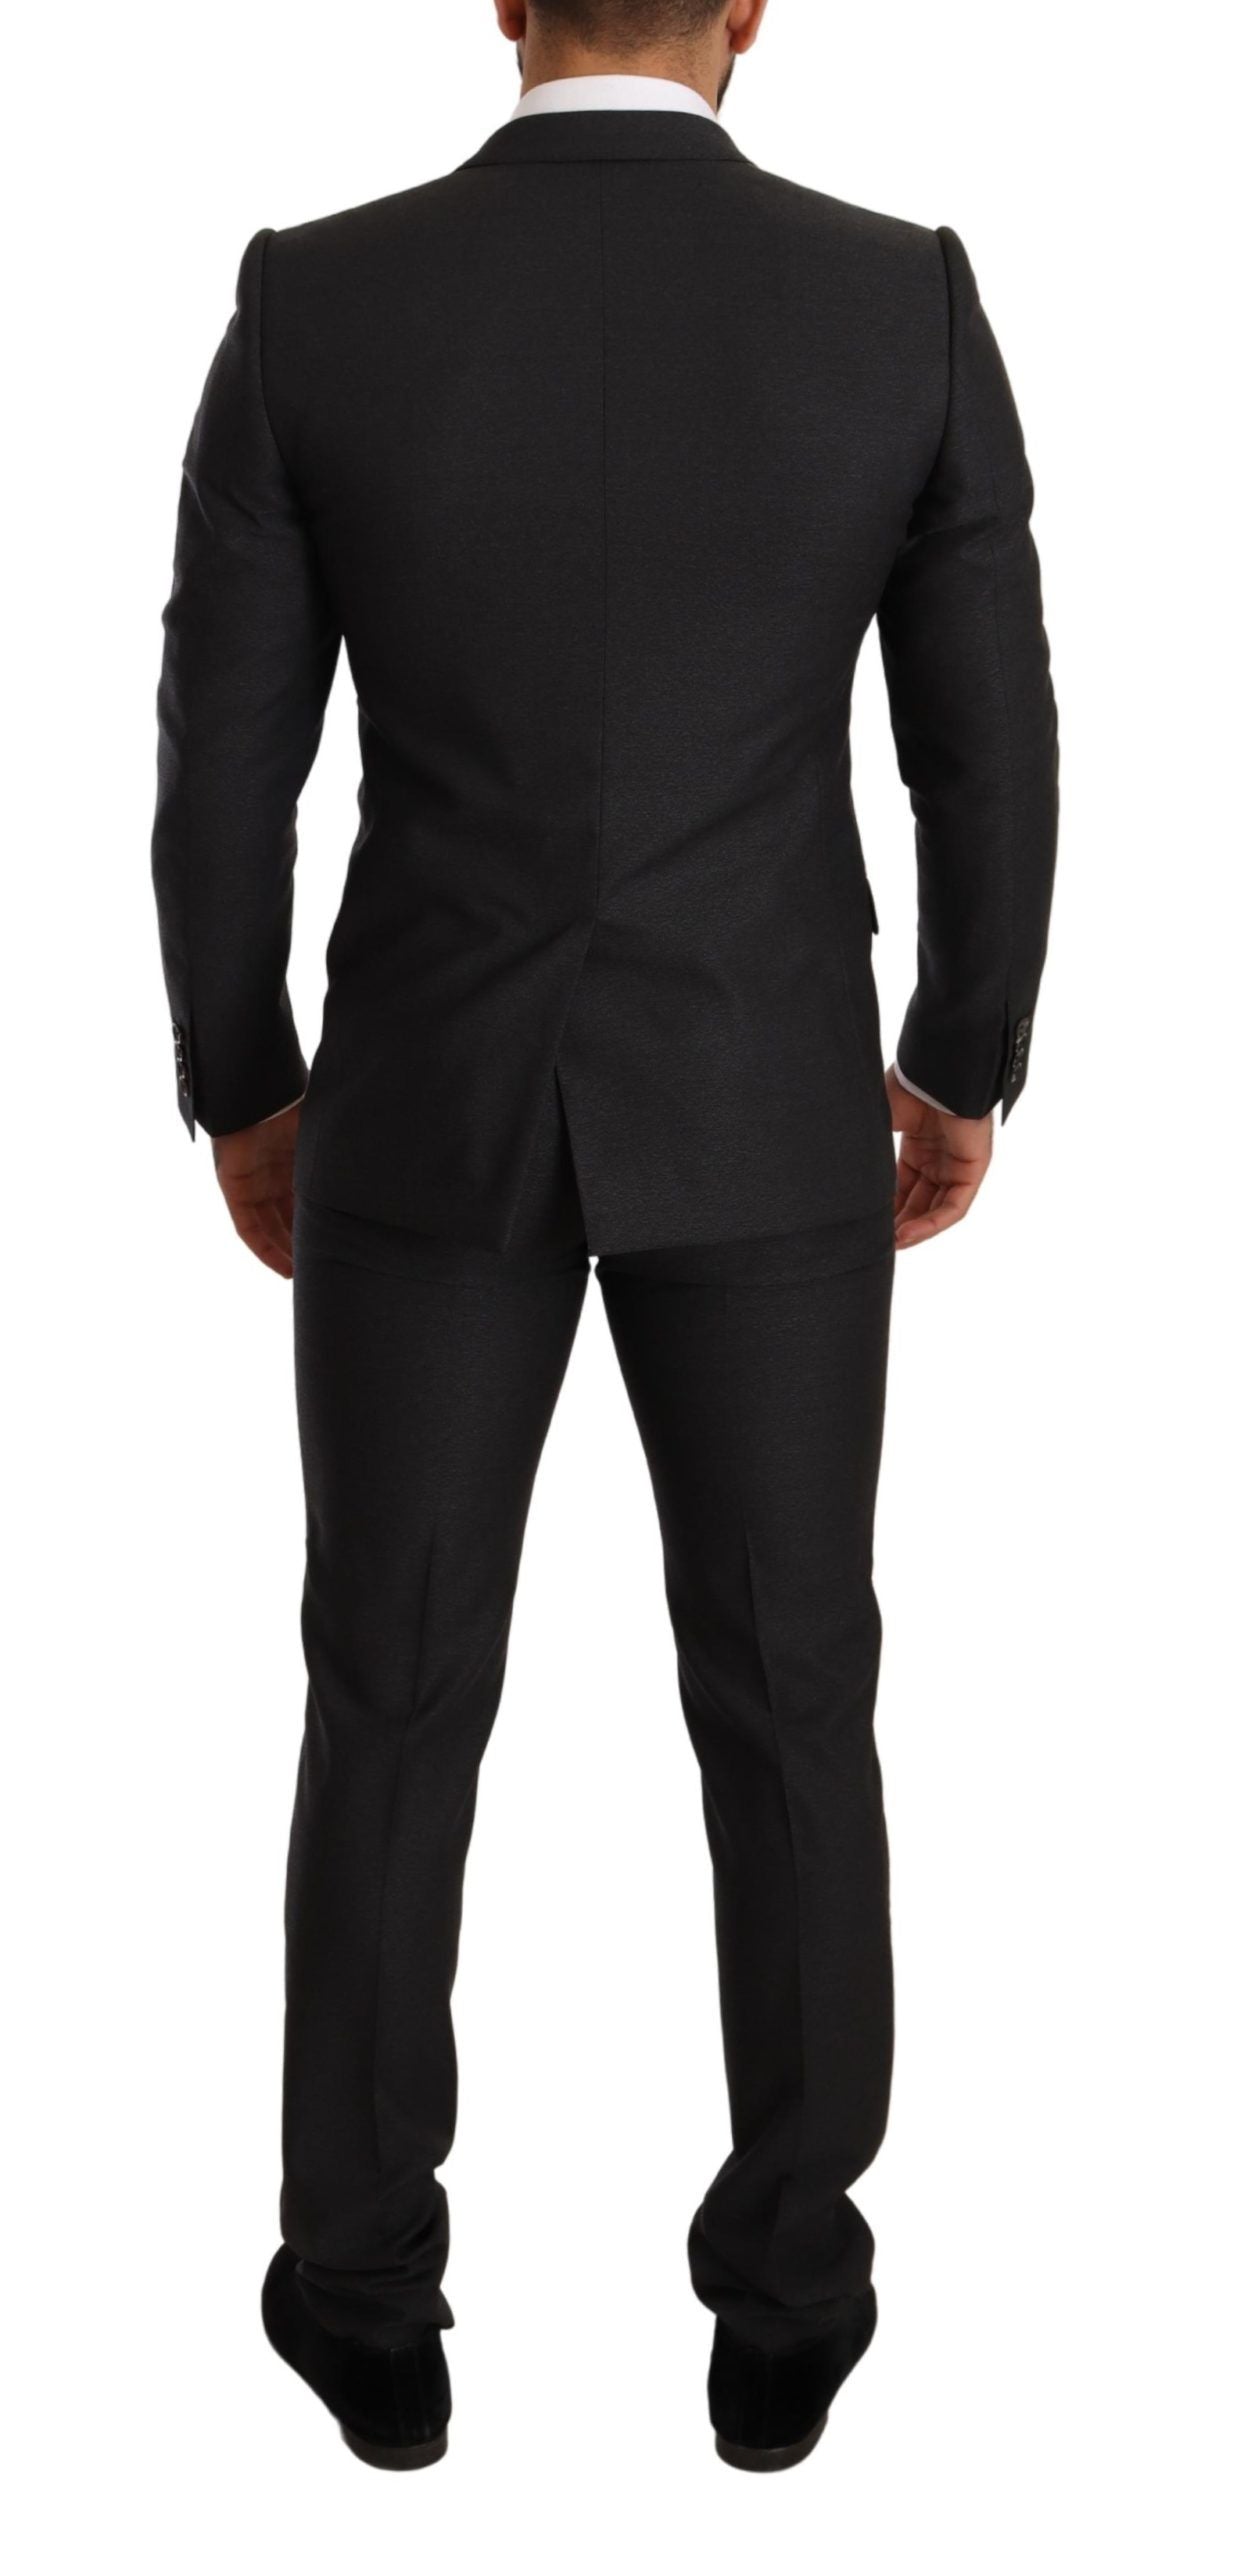 Dolce & Gabbana Men's Gray Wool MARTINI Slim Fit Set Suit - Designed by Dolce & Gabbana Available to Buy at a Discounted Price on Moon Behind The Hill Online Designer Discount Store